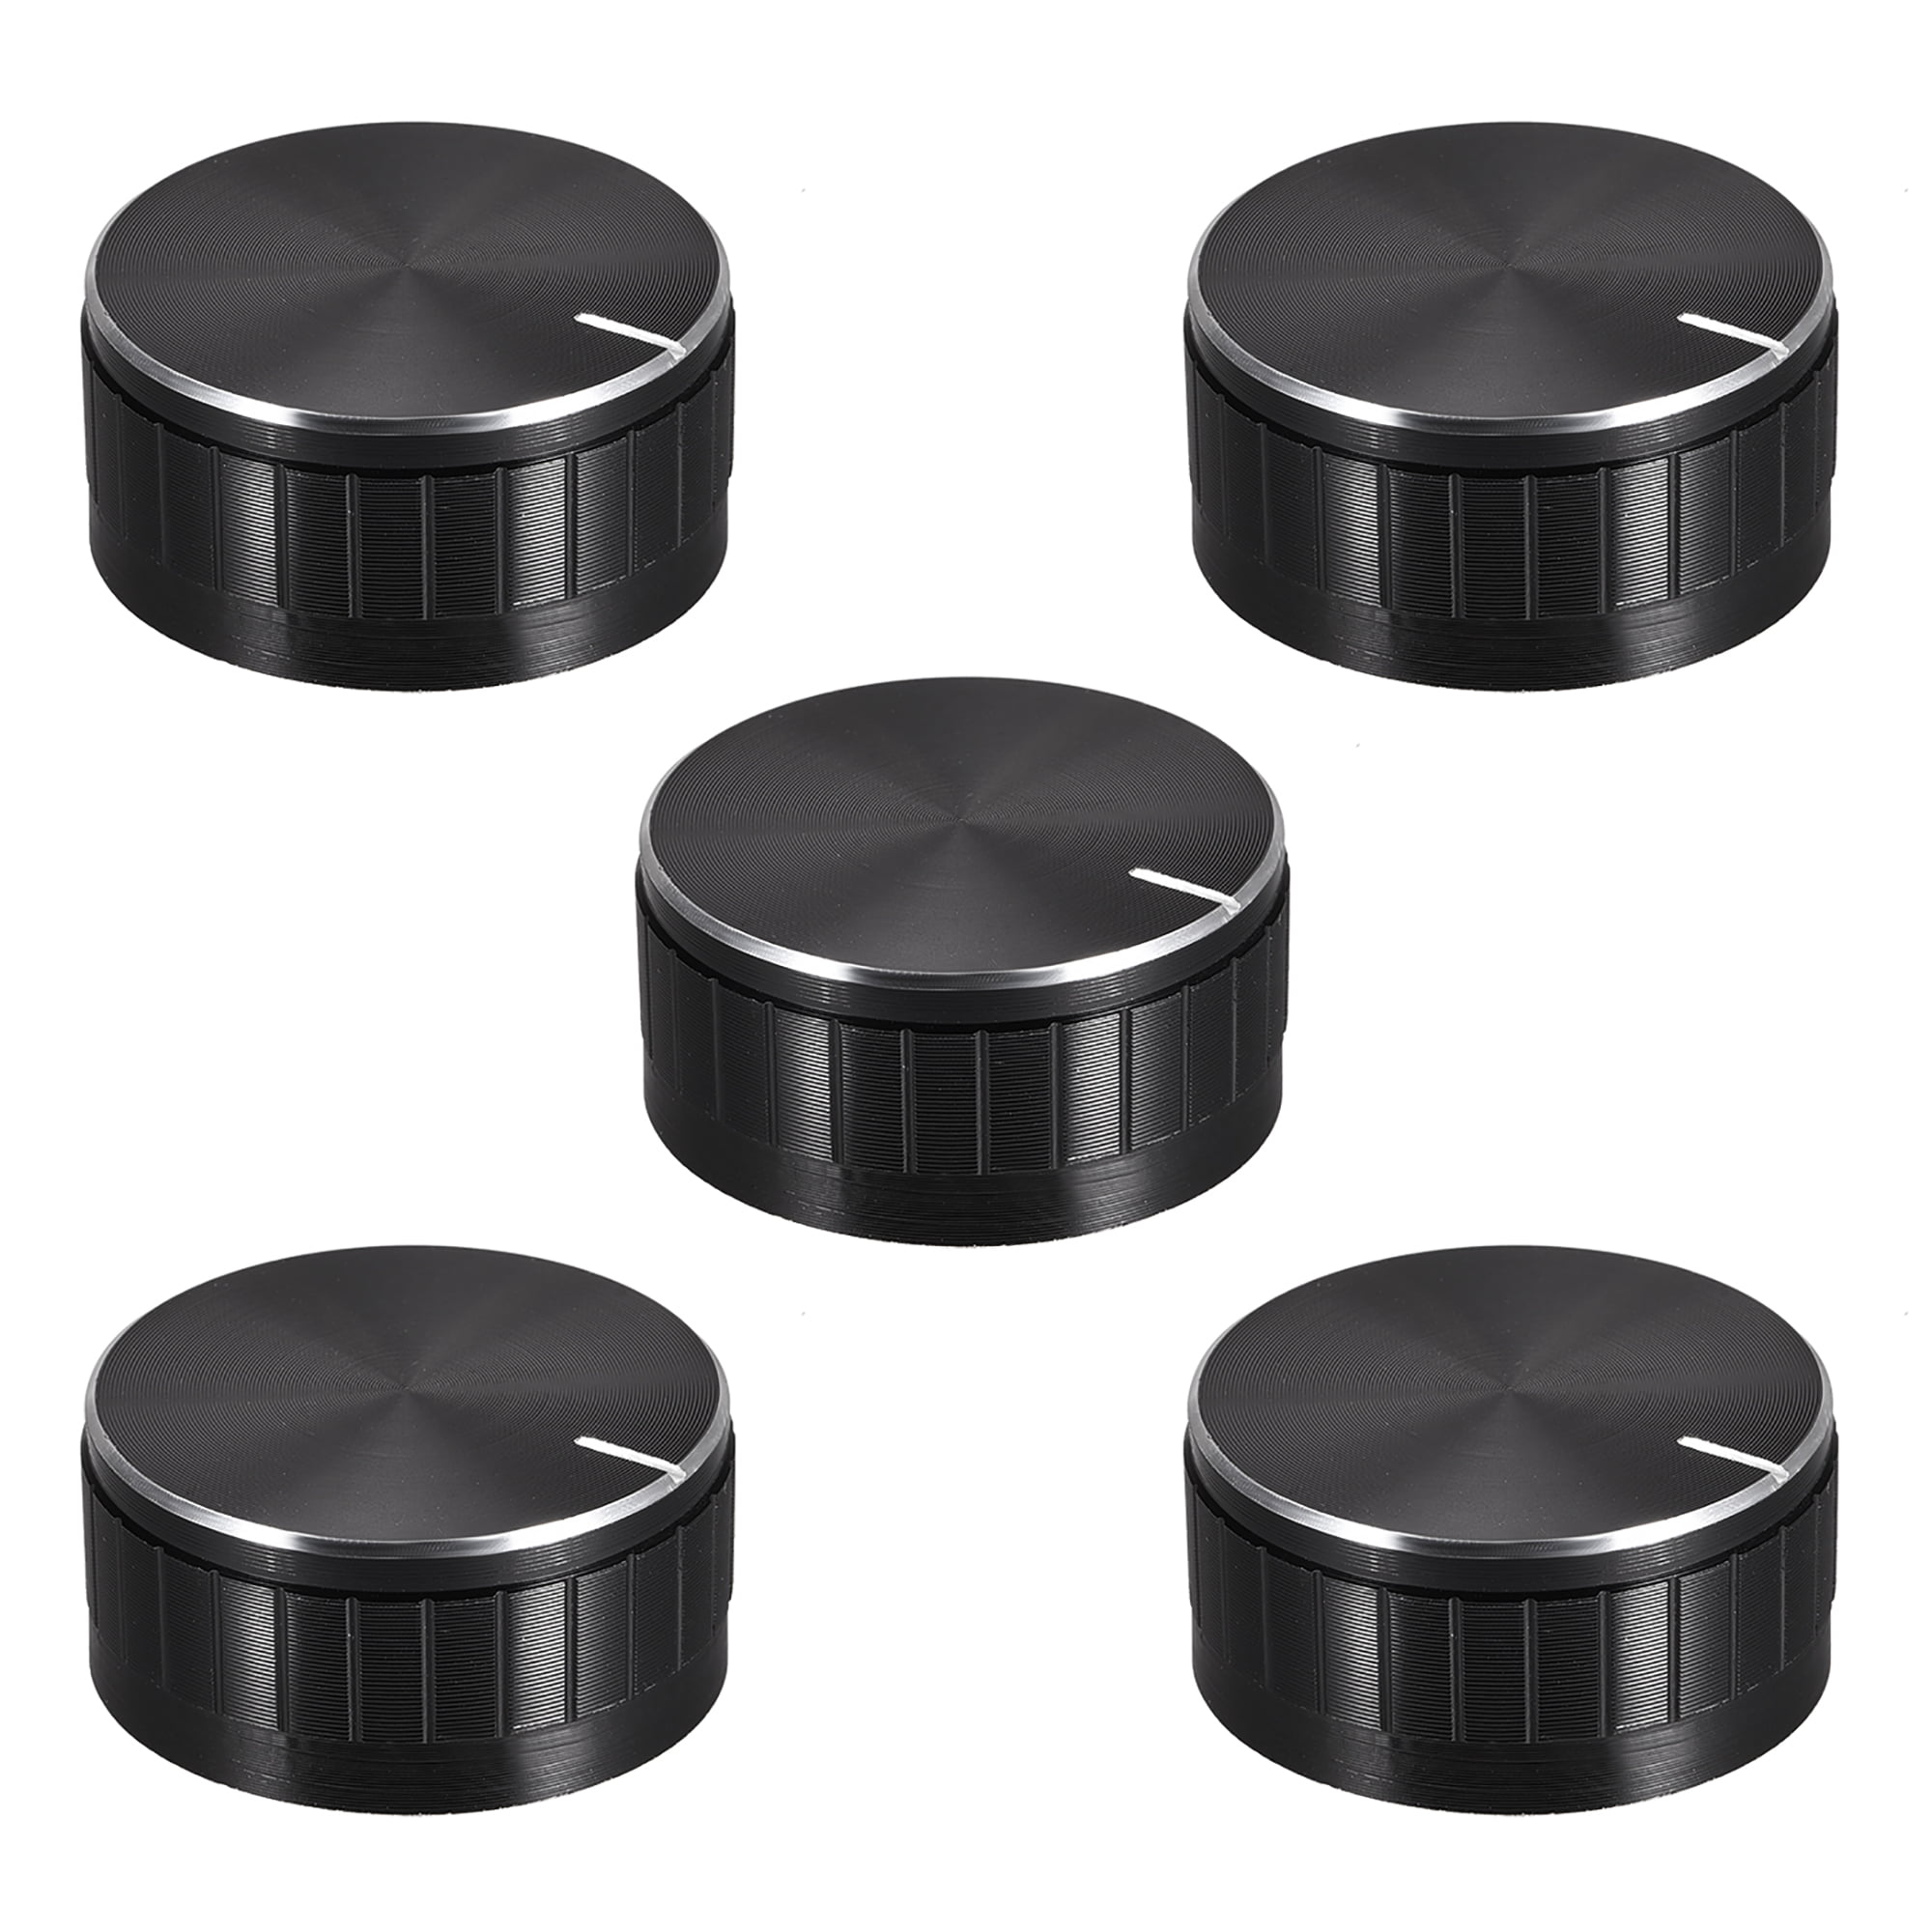 5set Black Rotary Potentiometer Knobs Caps with 5Pcs Counting Dial 0-100 ScaleS!